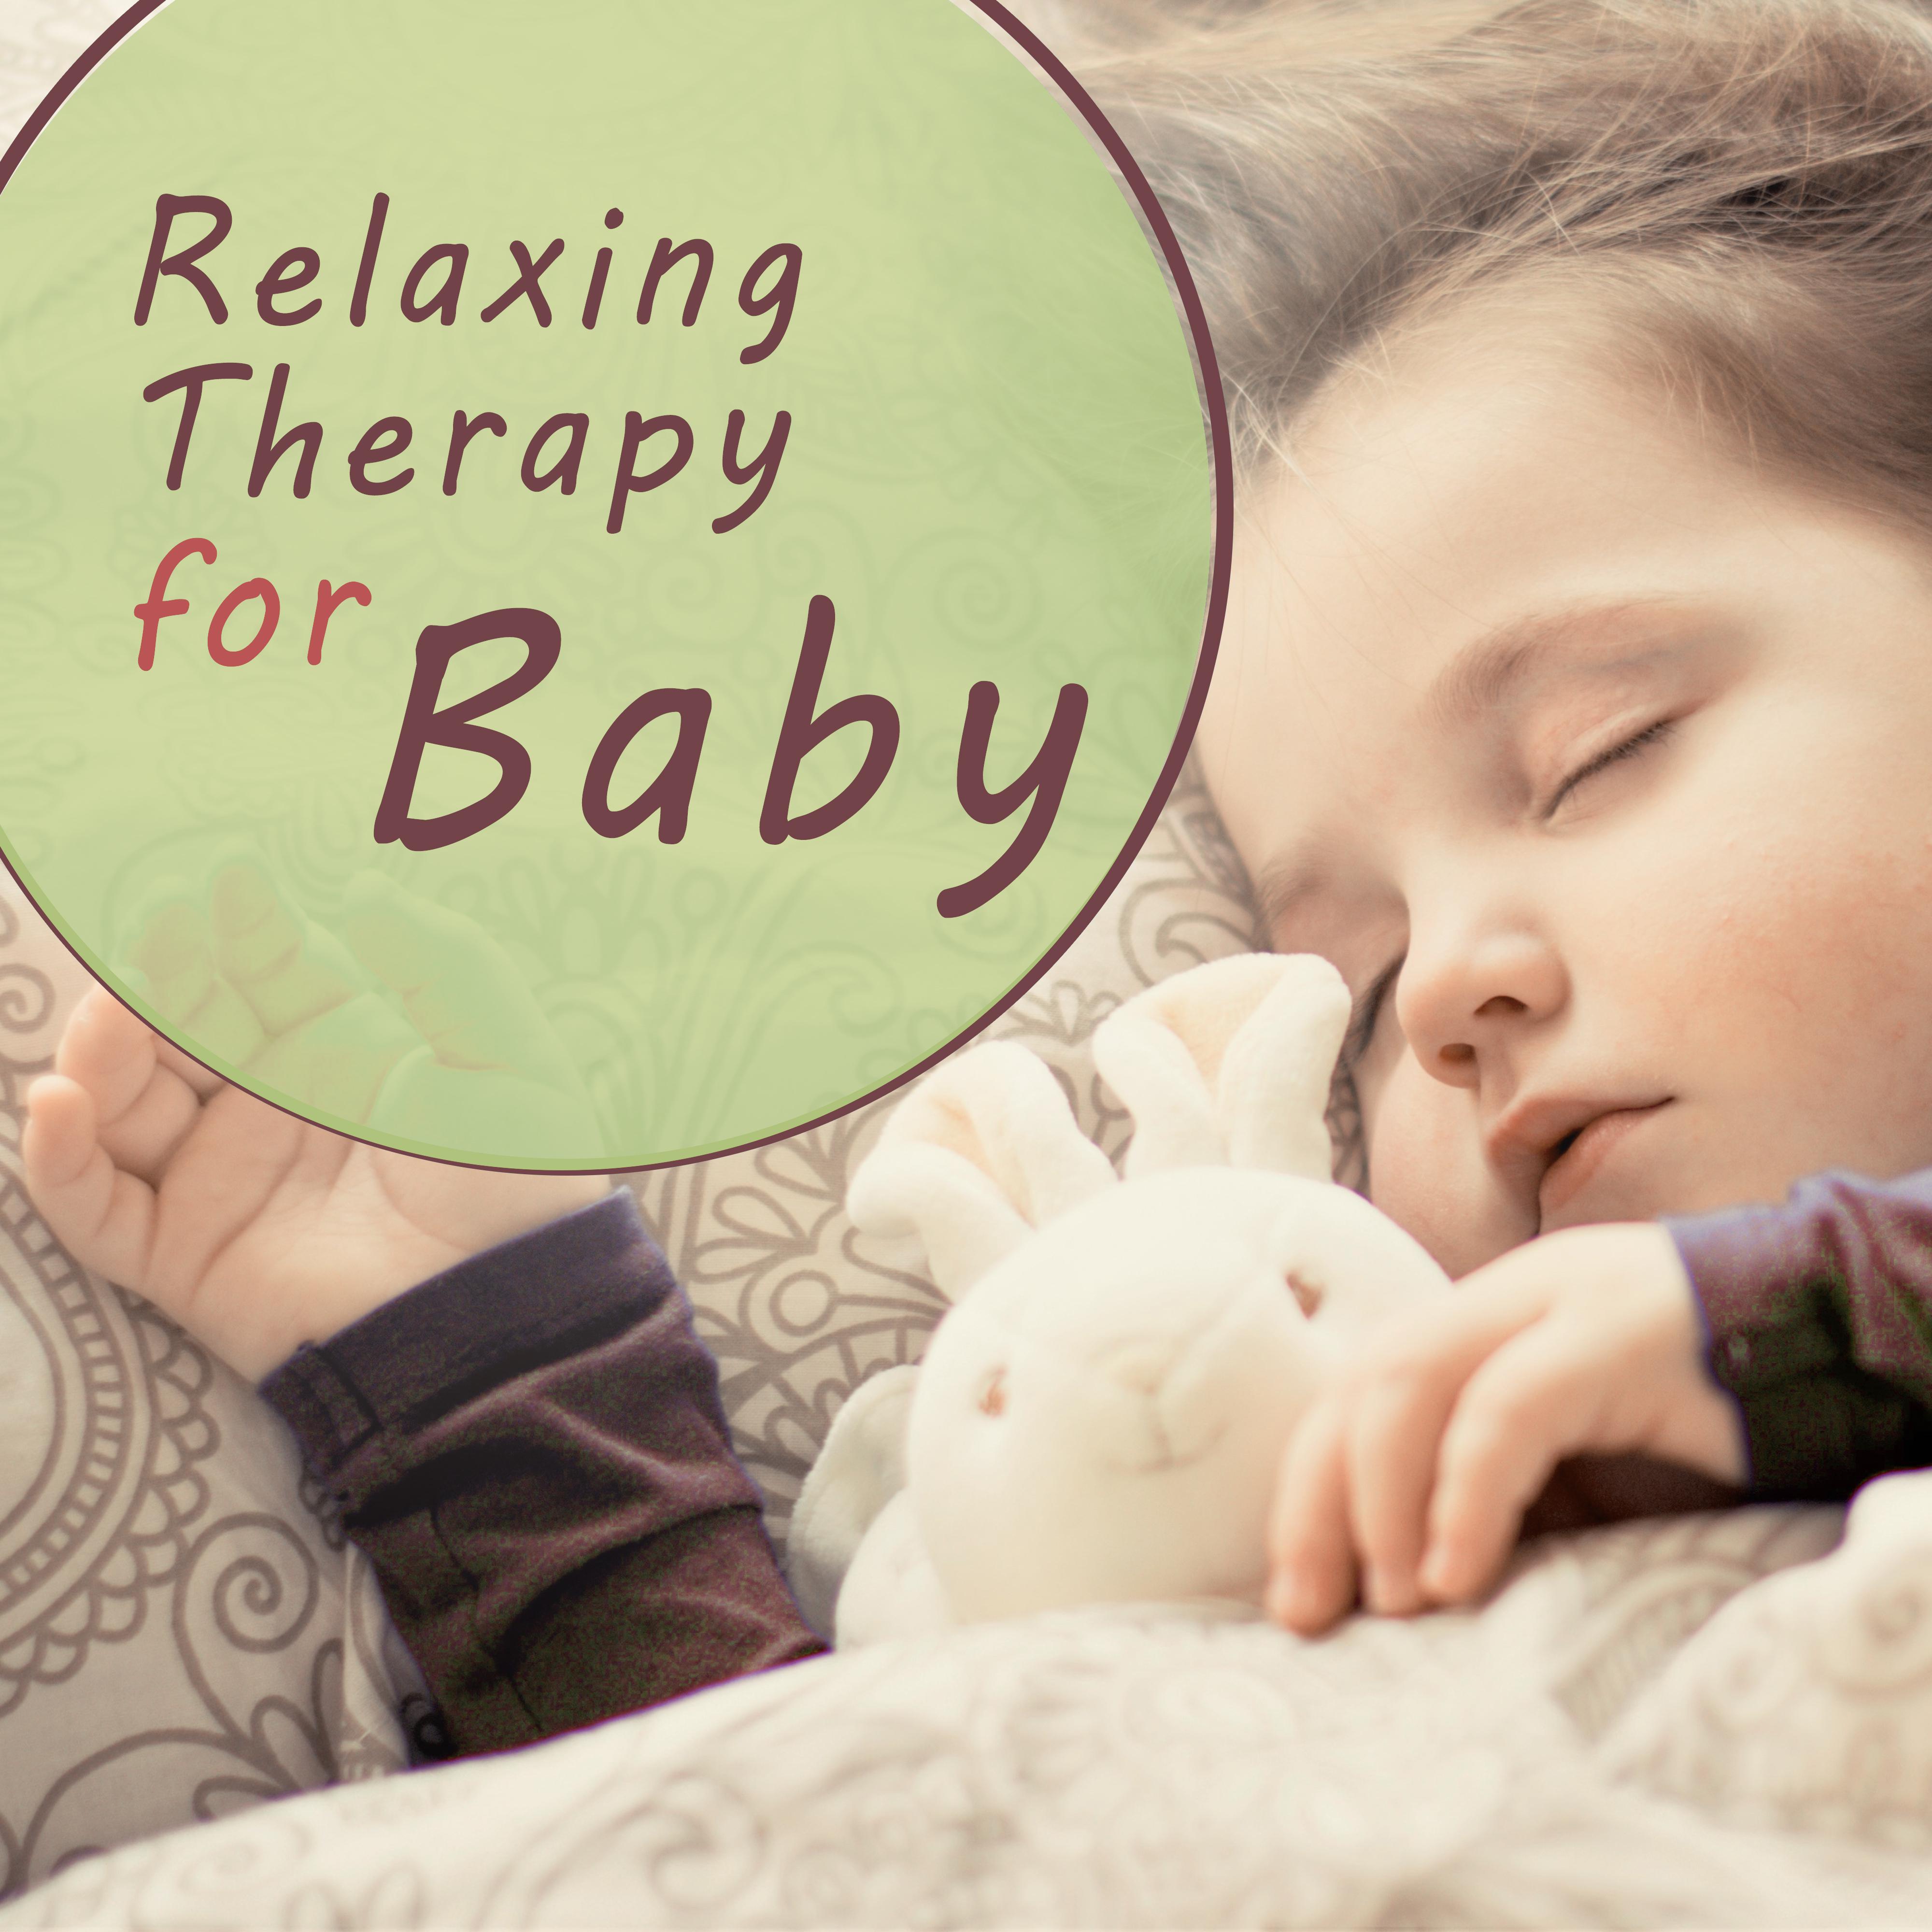 Relaxing Therapy for Baby  Deep Sleep, Soft Music to Bed, New Age Sounds, Sweet Nap, Calm Newborn, Healing Sleep, Lullabies to Pillow